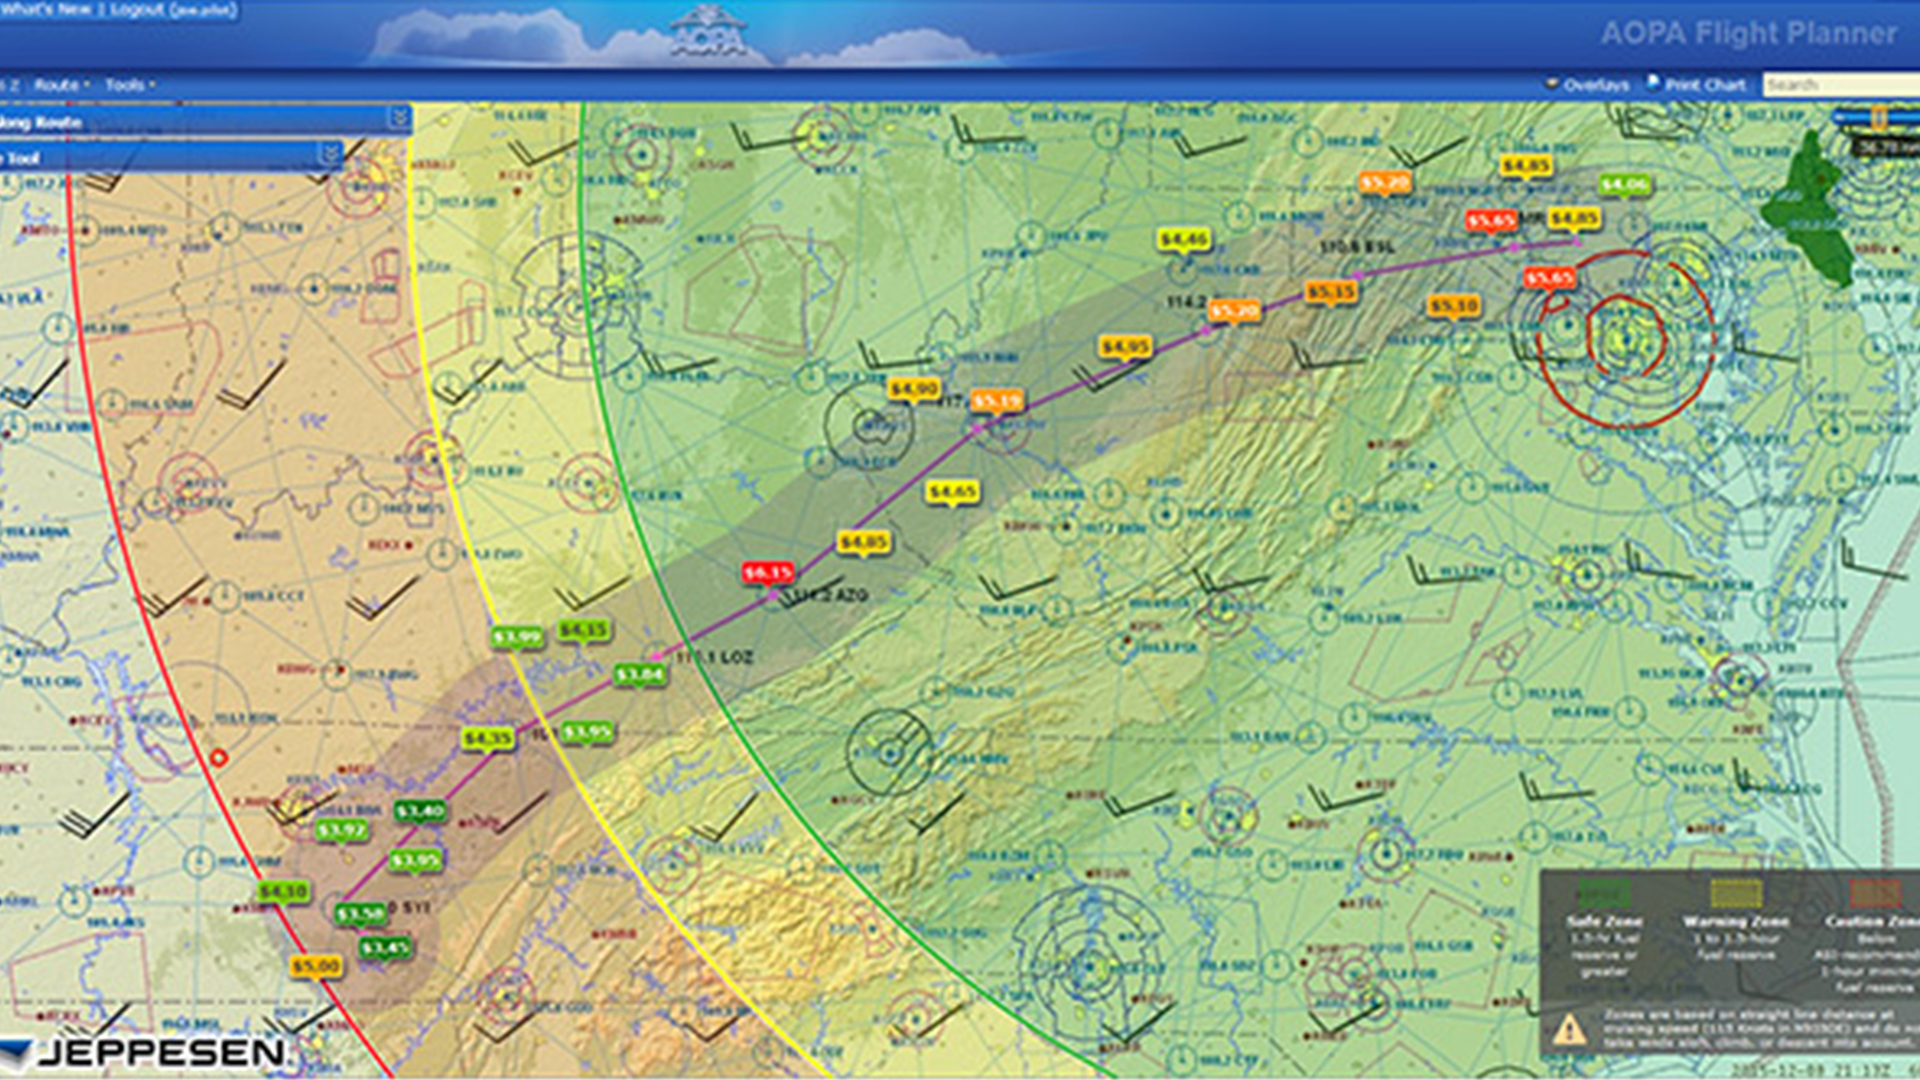 AOPA releases new versions of flight planning tools - AOPA